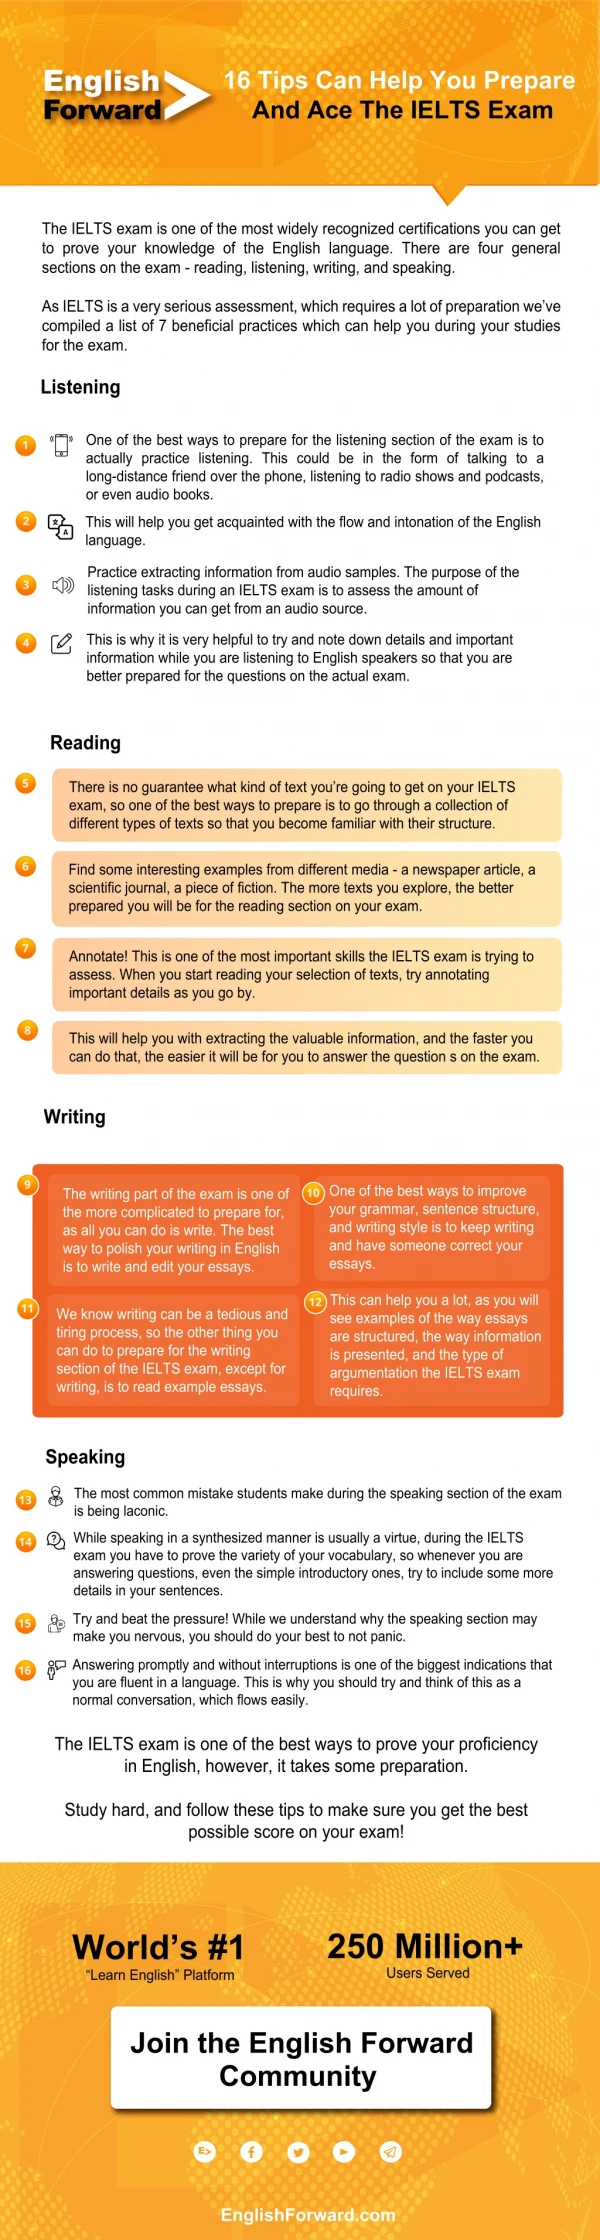 16 Tips Can Help You Prepare And Ace The IELTS Exam